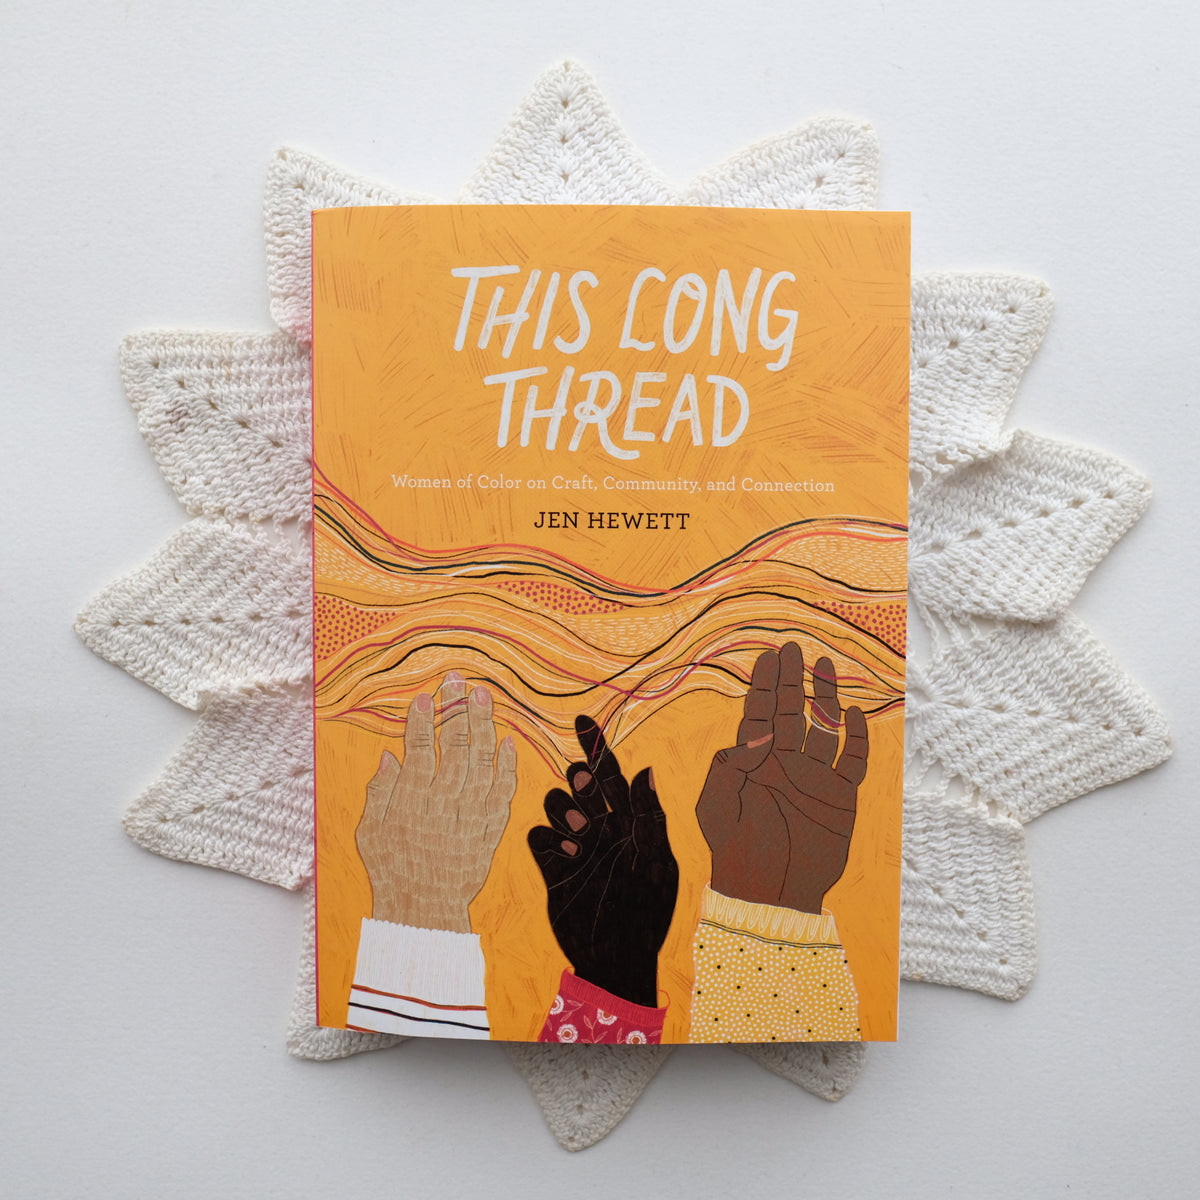 This Long Thread: Women of Color on Craft, Community, and Connection by Jen Hewett